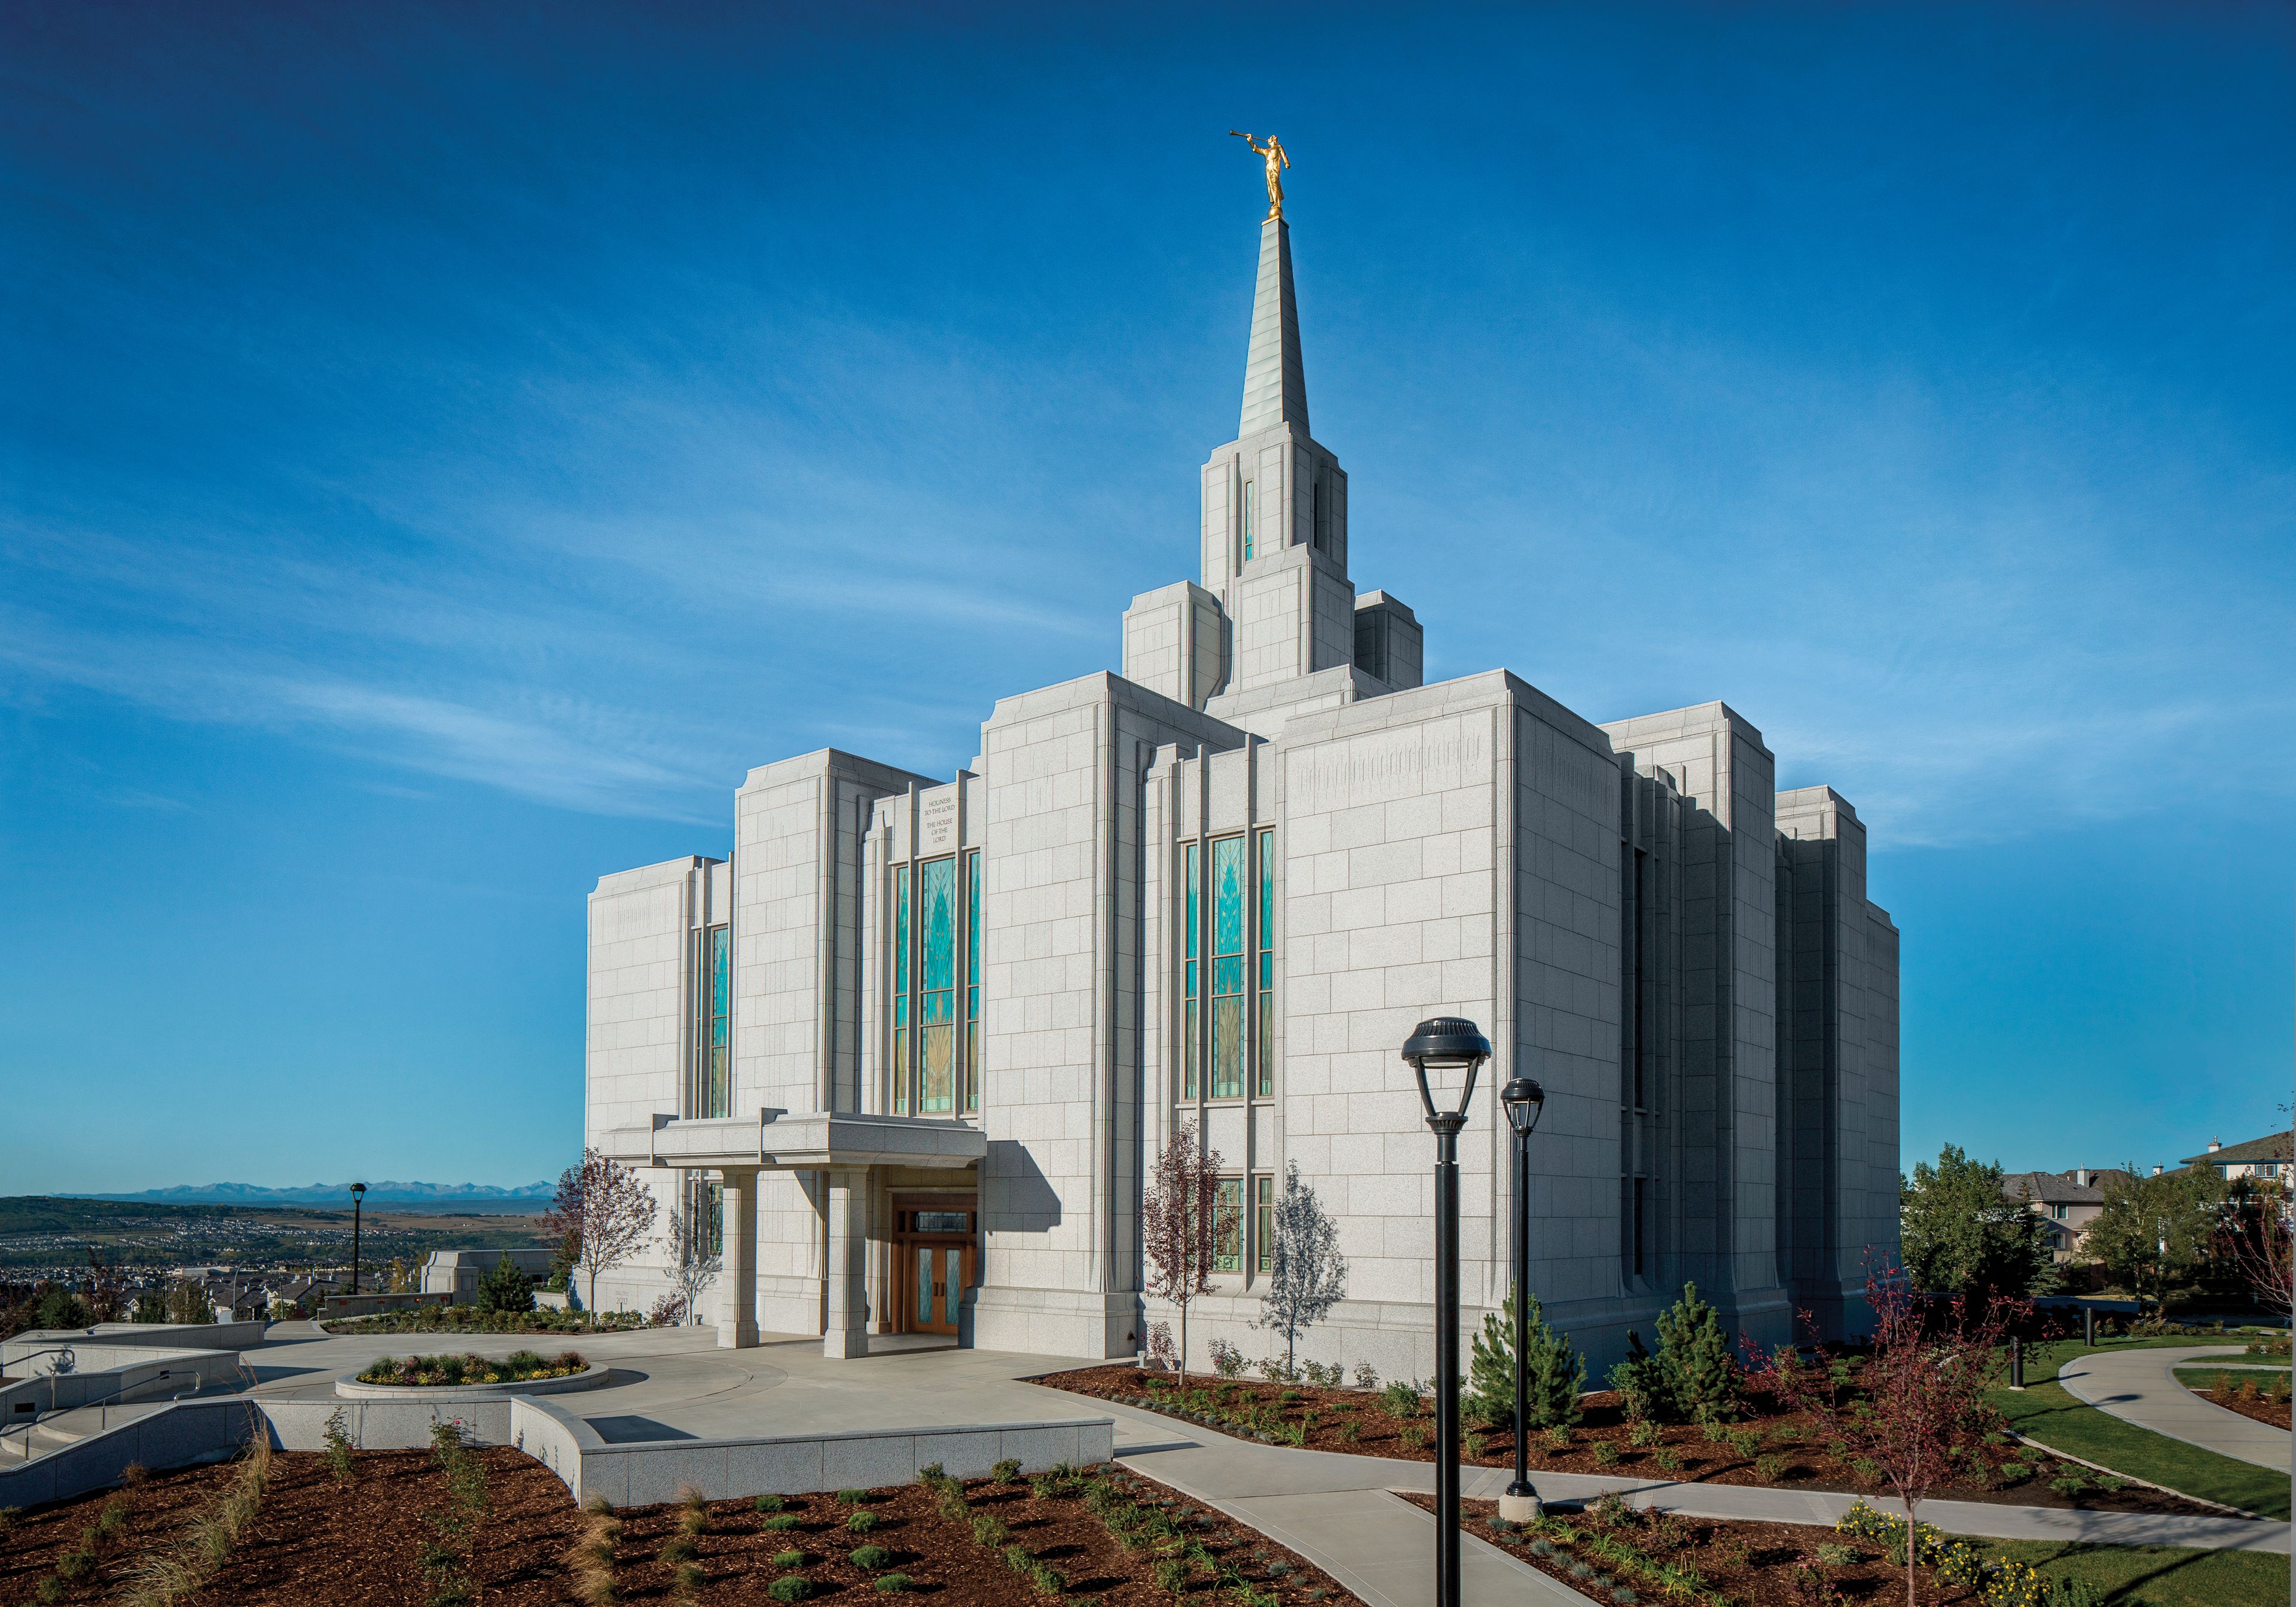 An exterior view of the Calgary Alberta Temple.